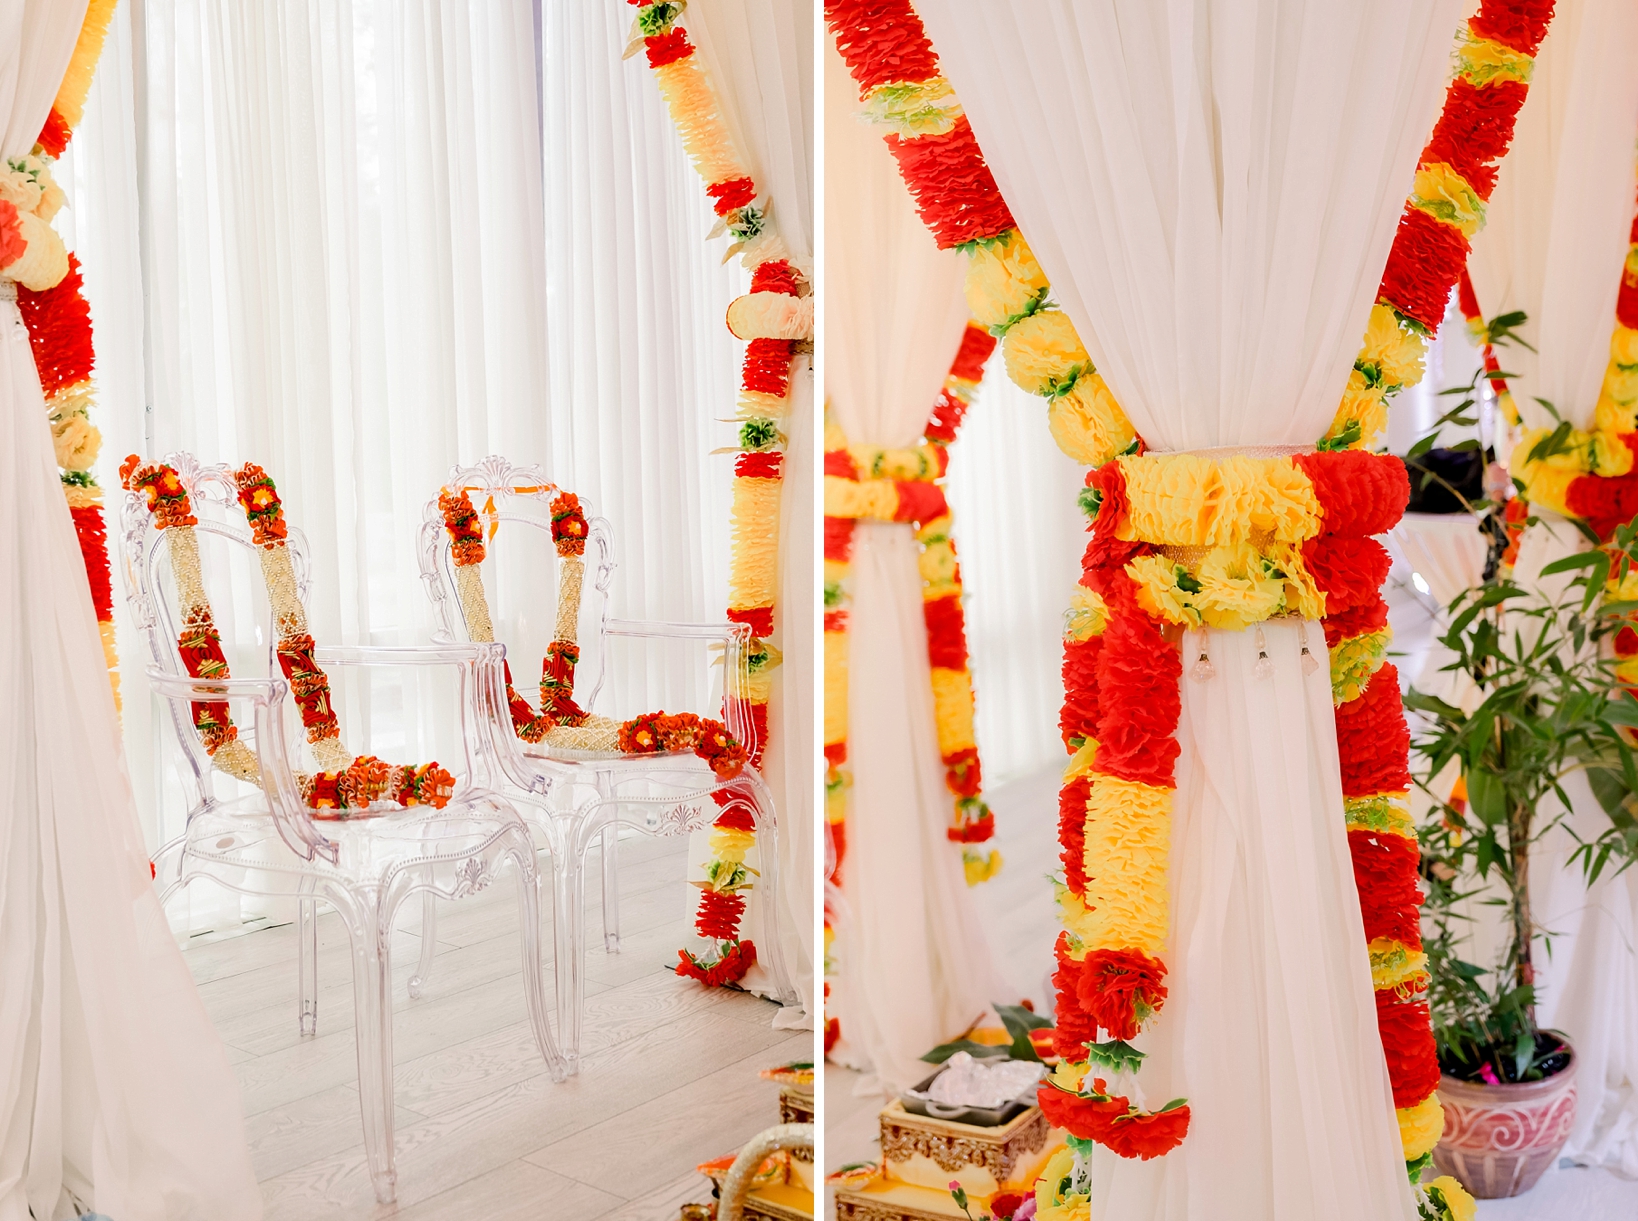 The flowers filled up the wedding ceremony space for the Hindu Ceremony in the Crystal Ballroom by Sarah & Ben Photography